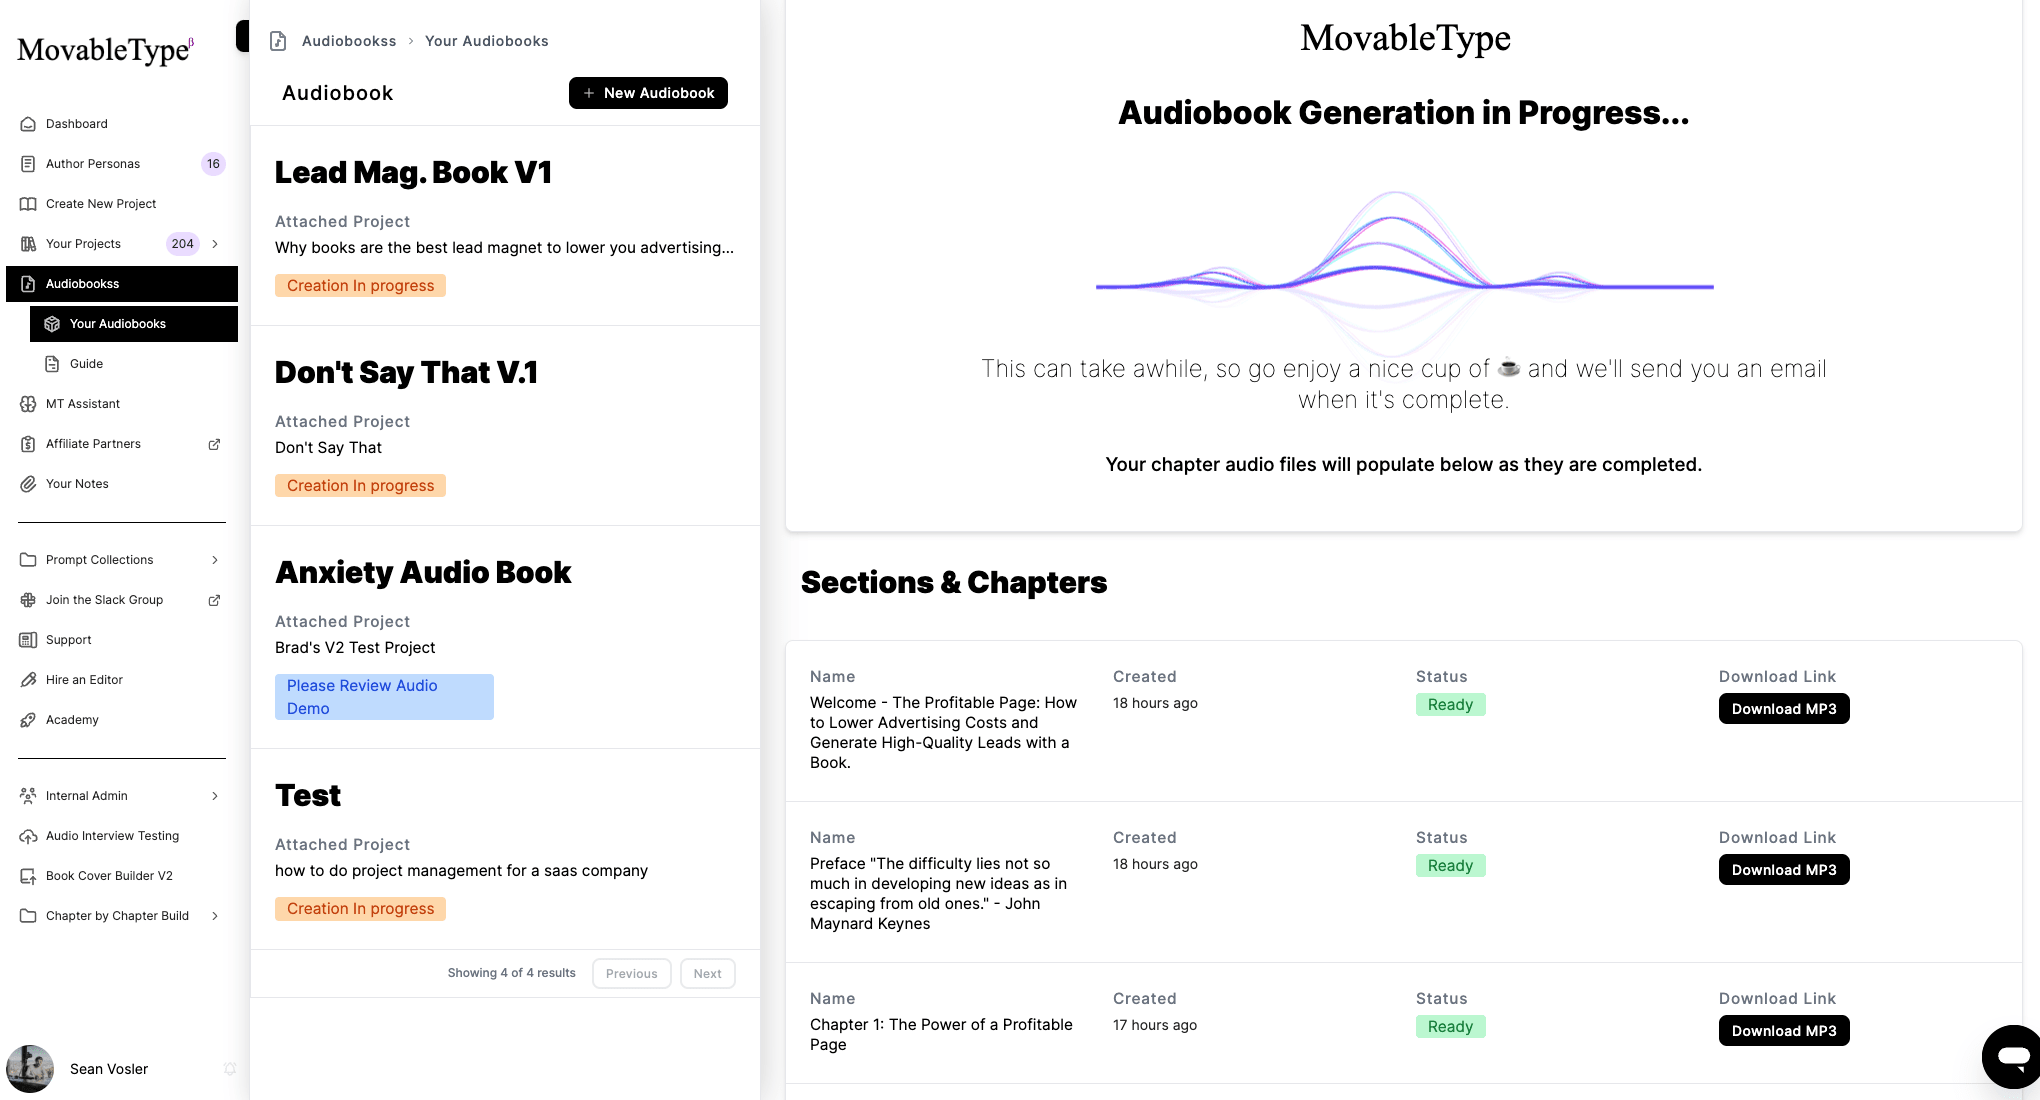 How to Create Audio Books With MovableType.ai